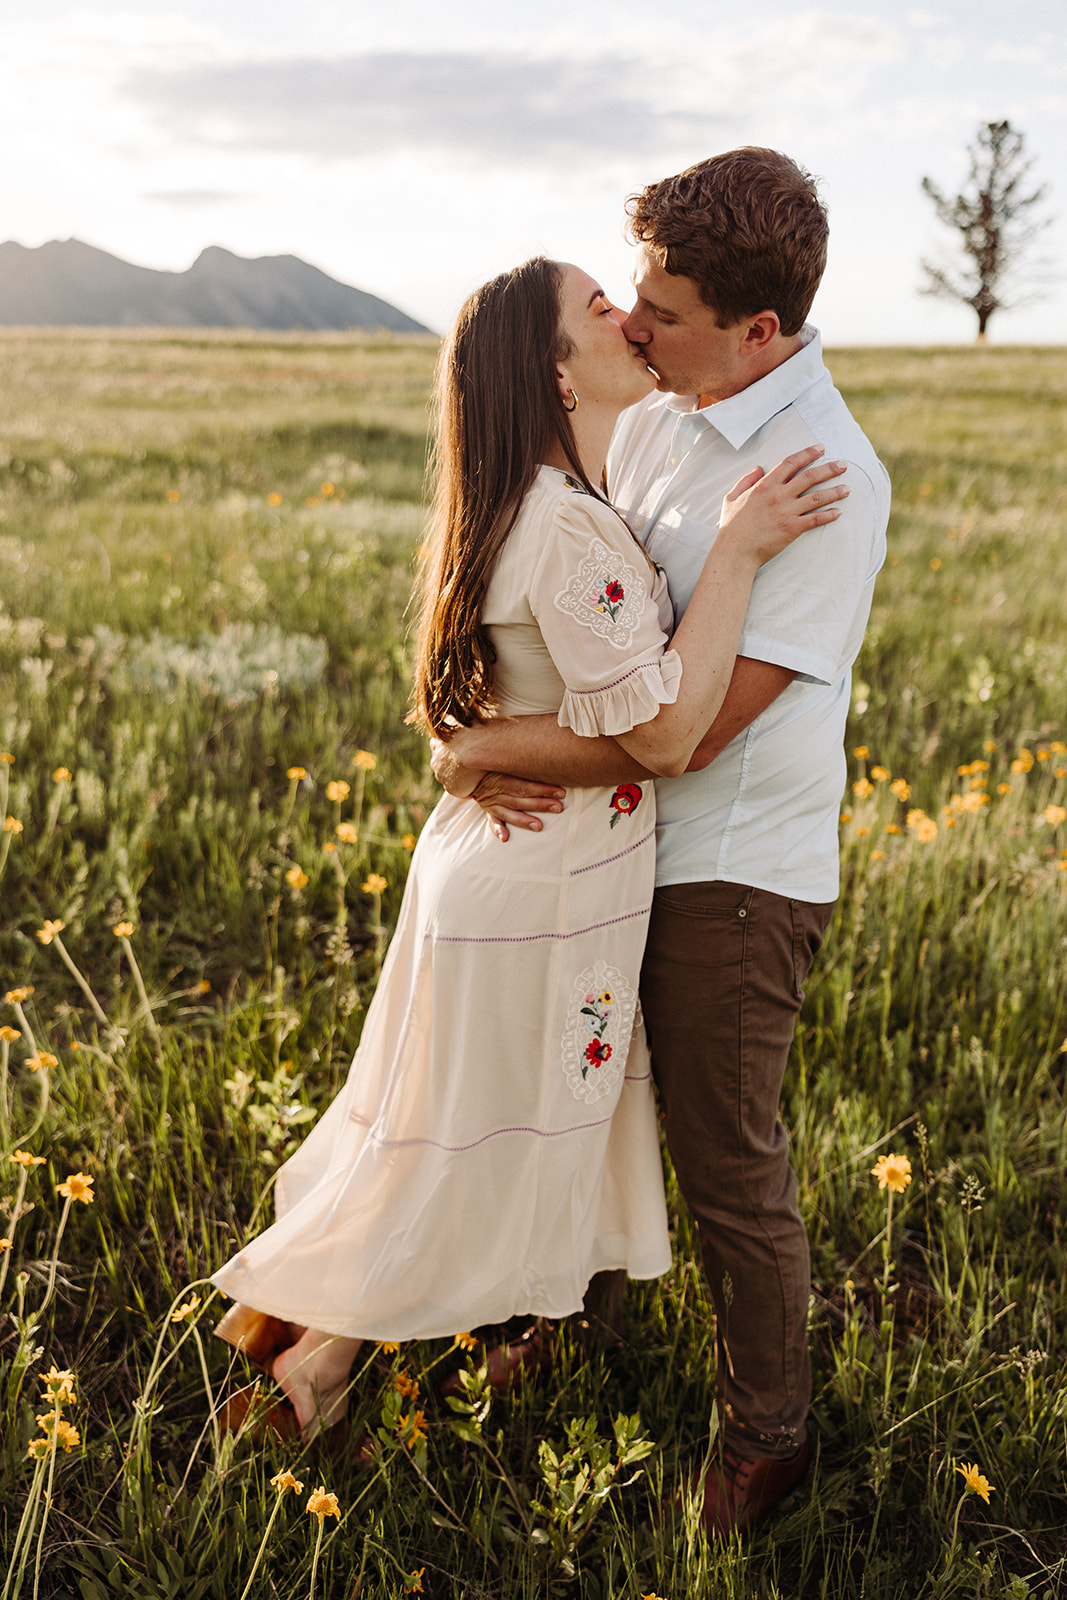 Engaged couple hugging in a field of yellow flowers during